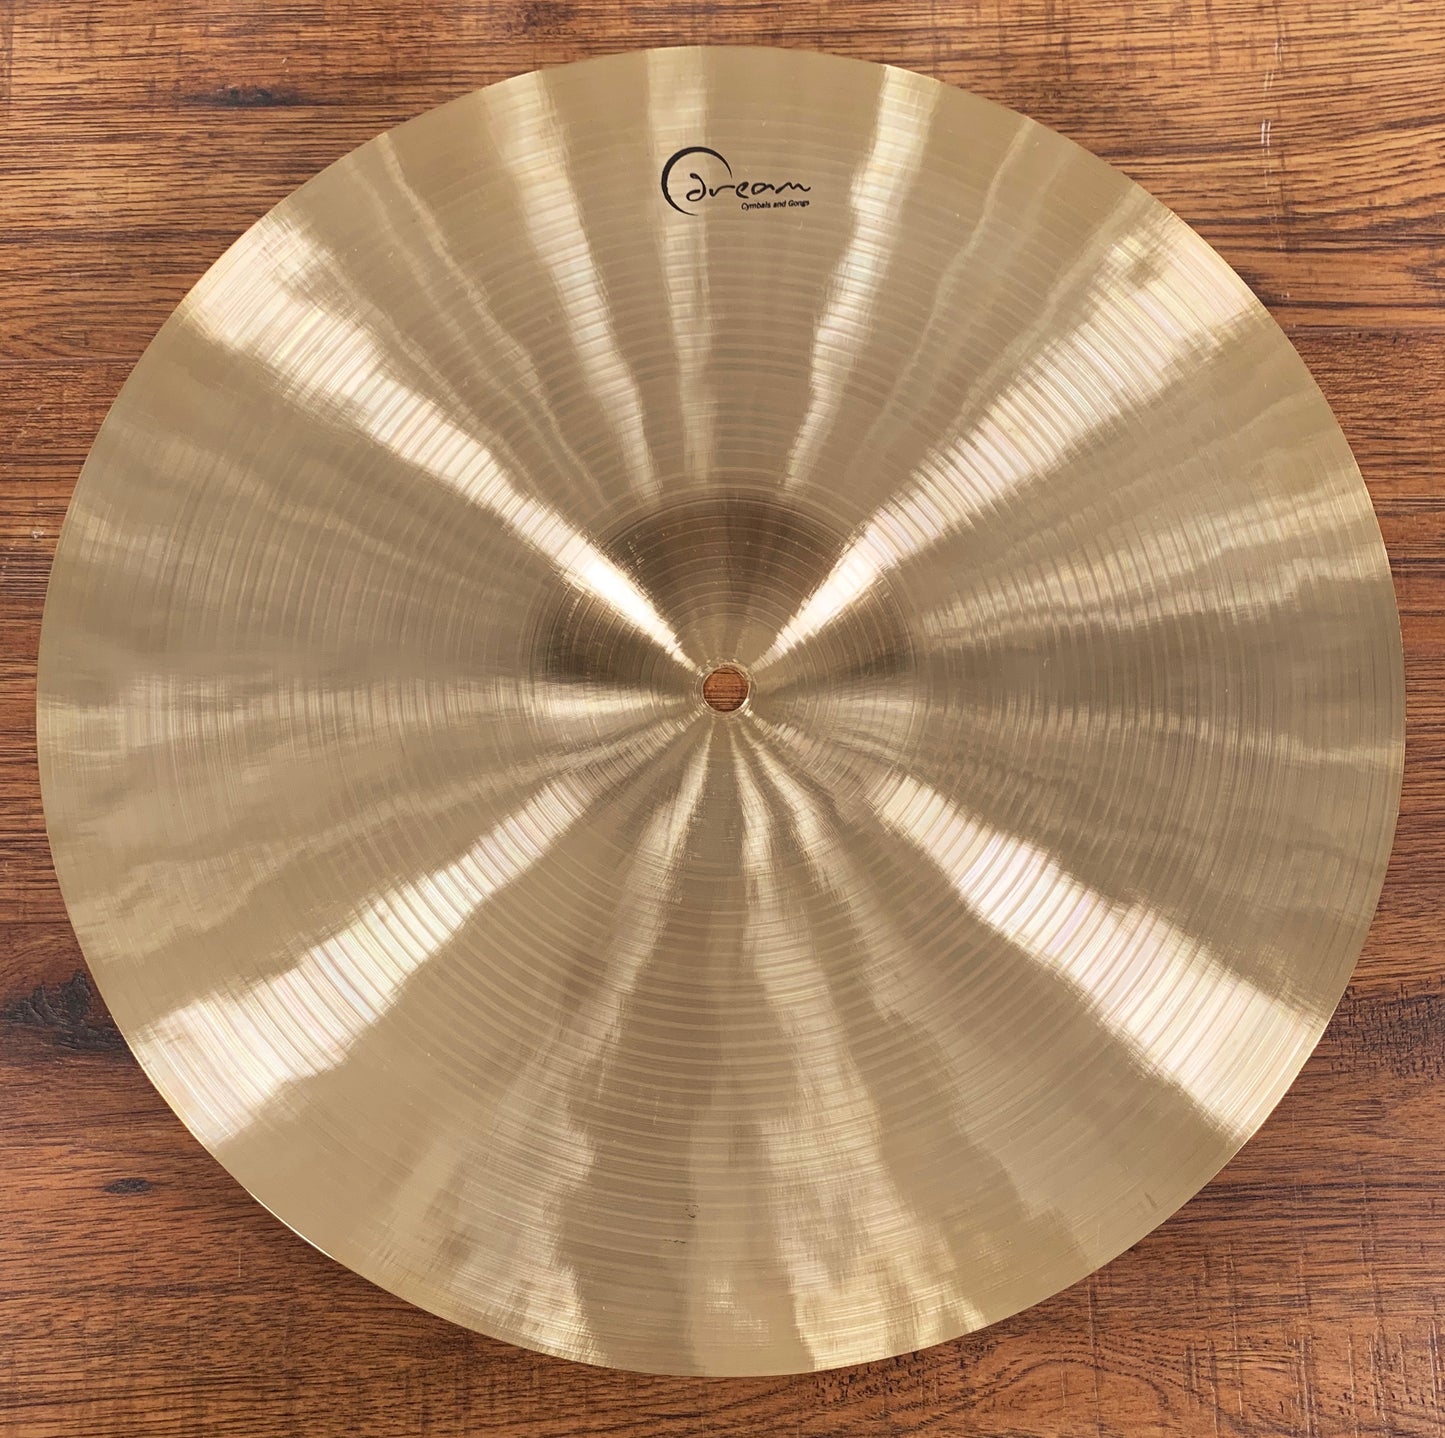 Dream Cymbals C-HH14 Contact Series Hand Forged & Hammered 14" Hi Hat Set